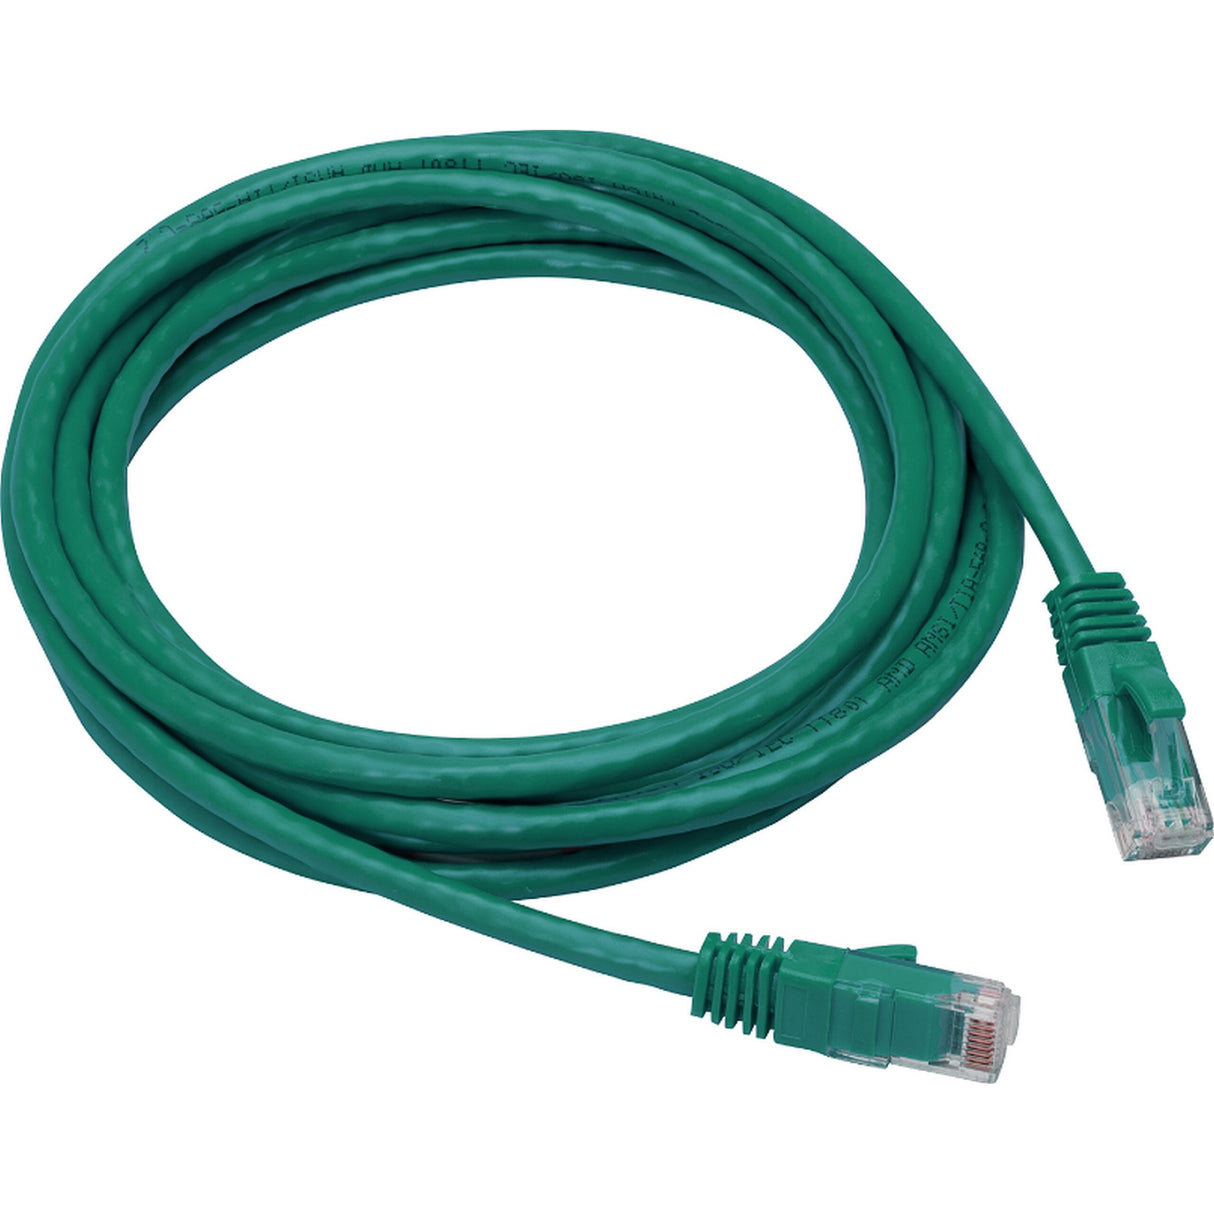 Liberty AV 152G5U5010 Category 5E True 24AWG Patch Cable, 10 Foot, Green